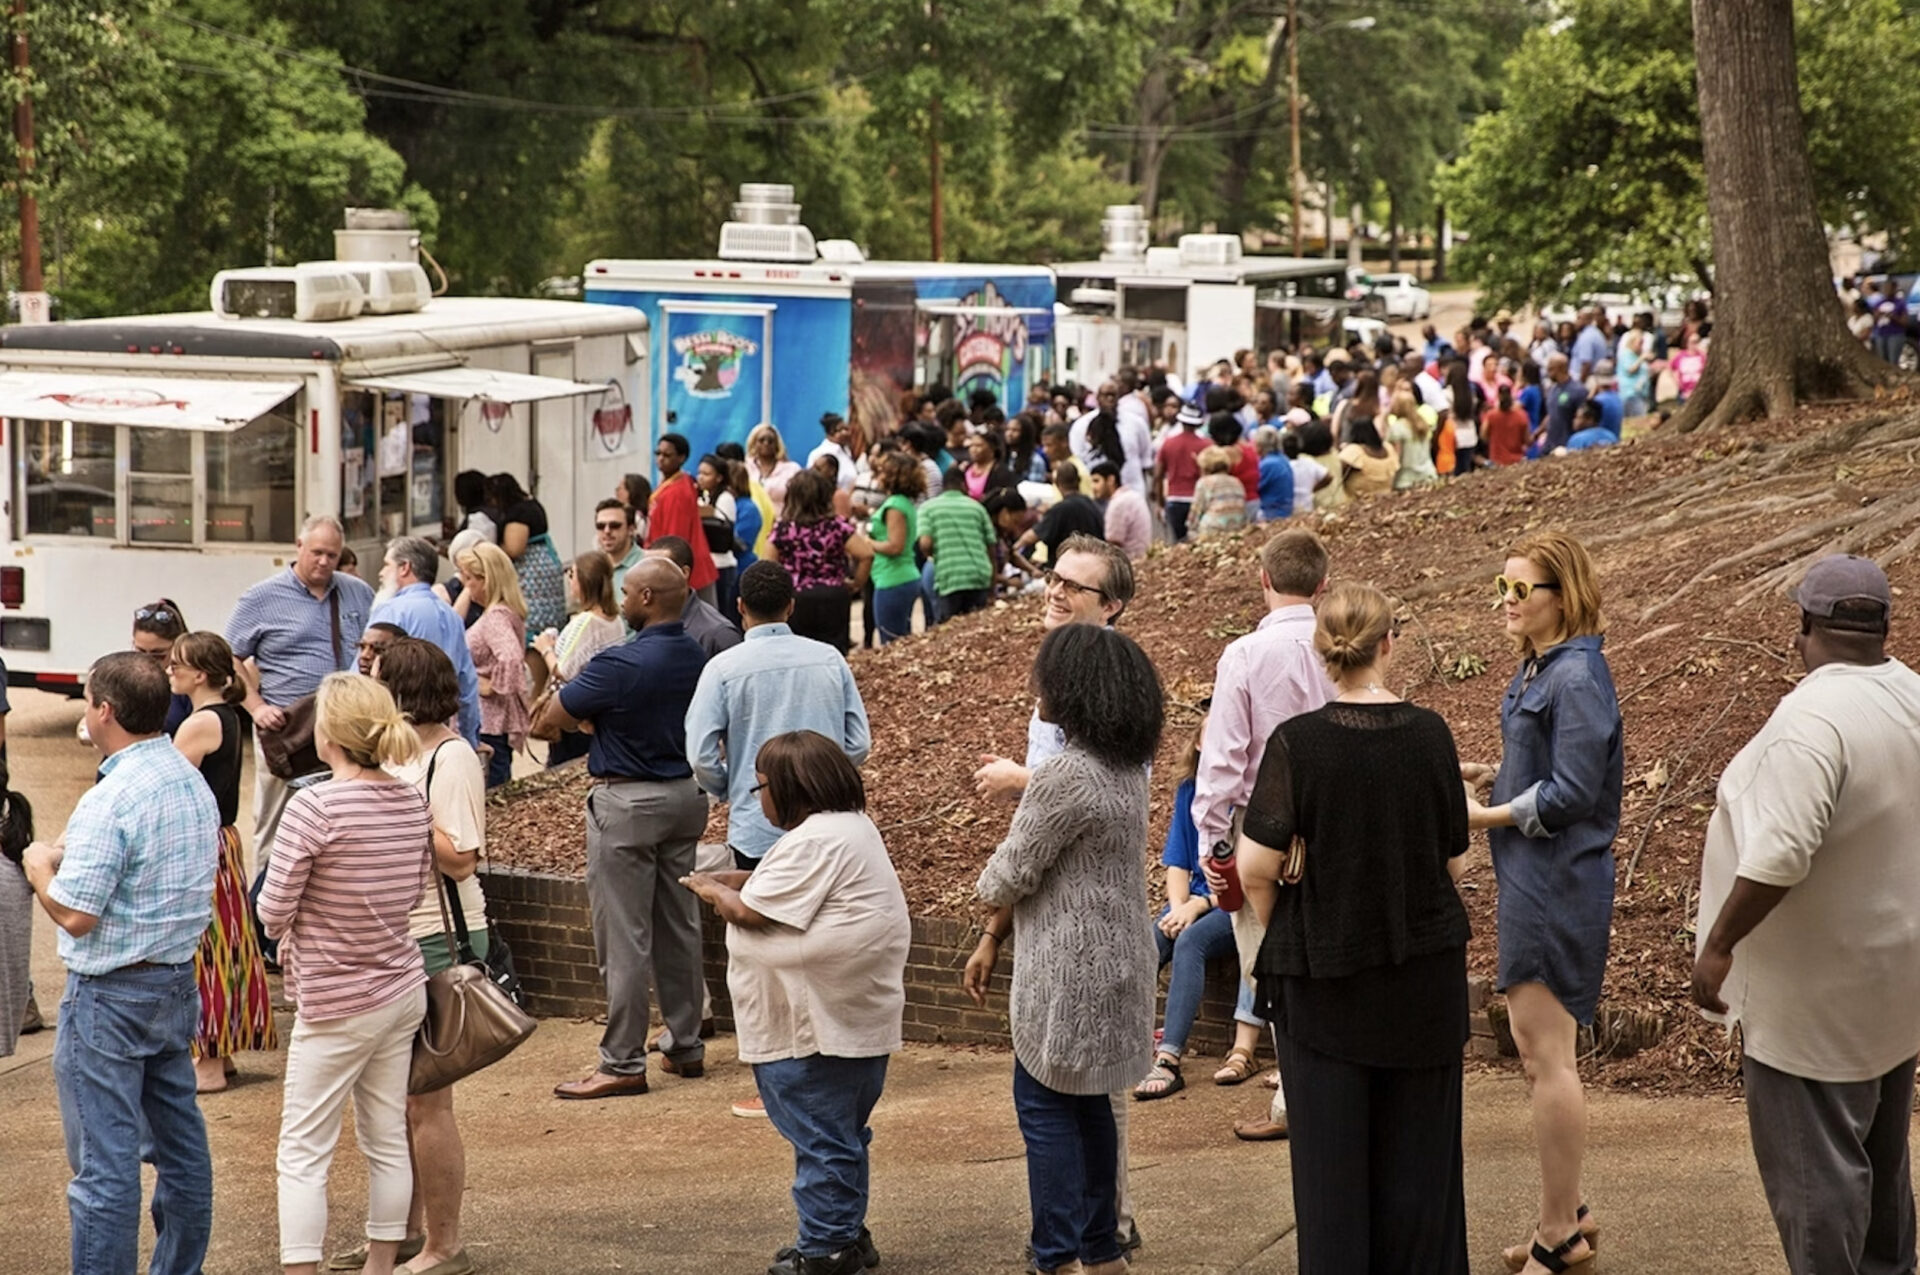 Food Truck Friday in the Park: Fall Market Edition!